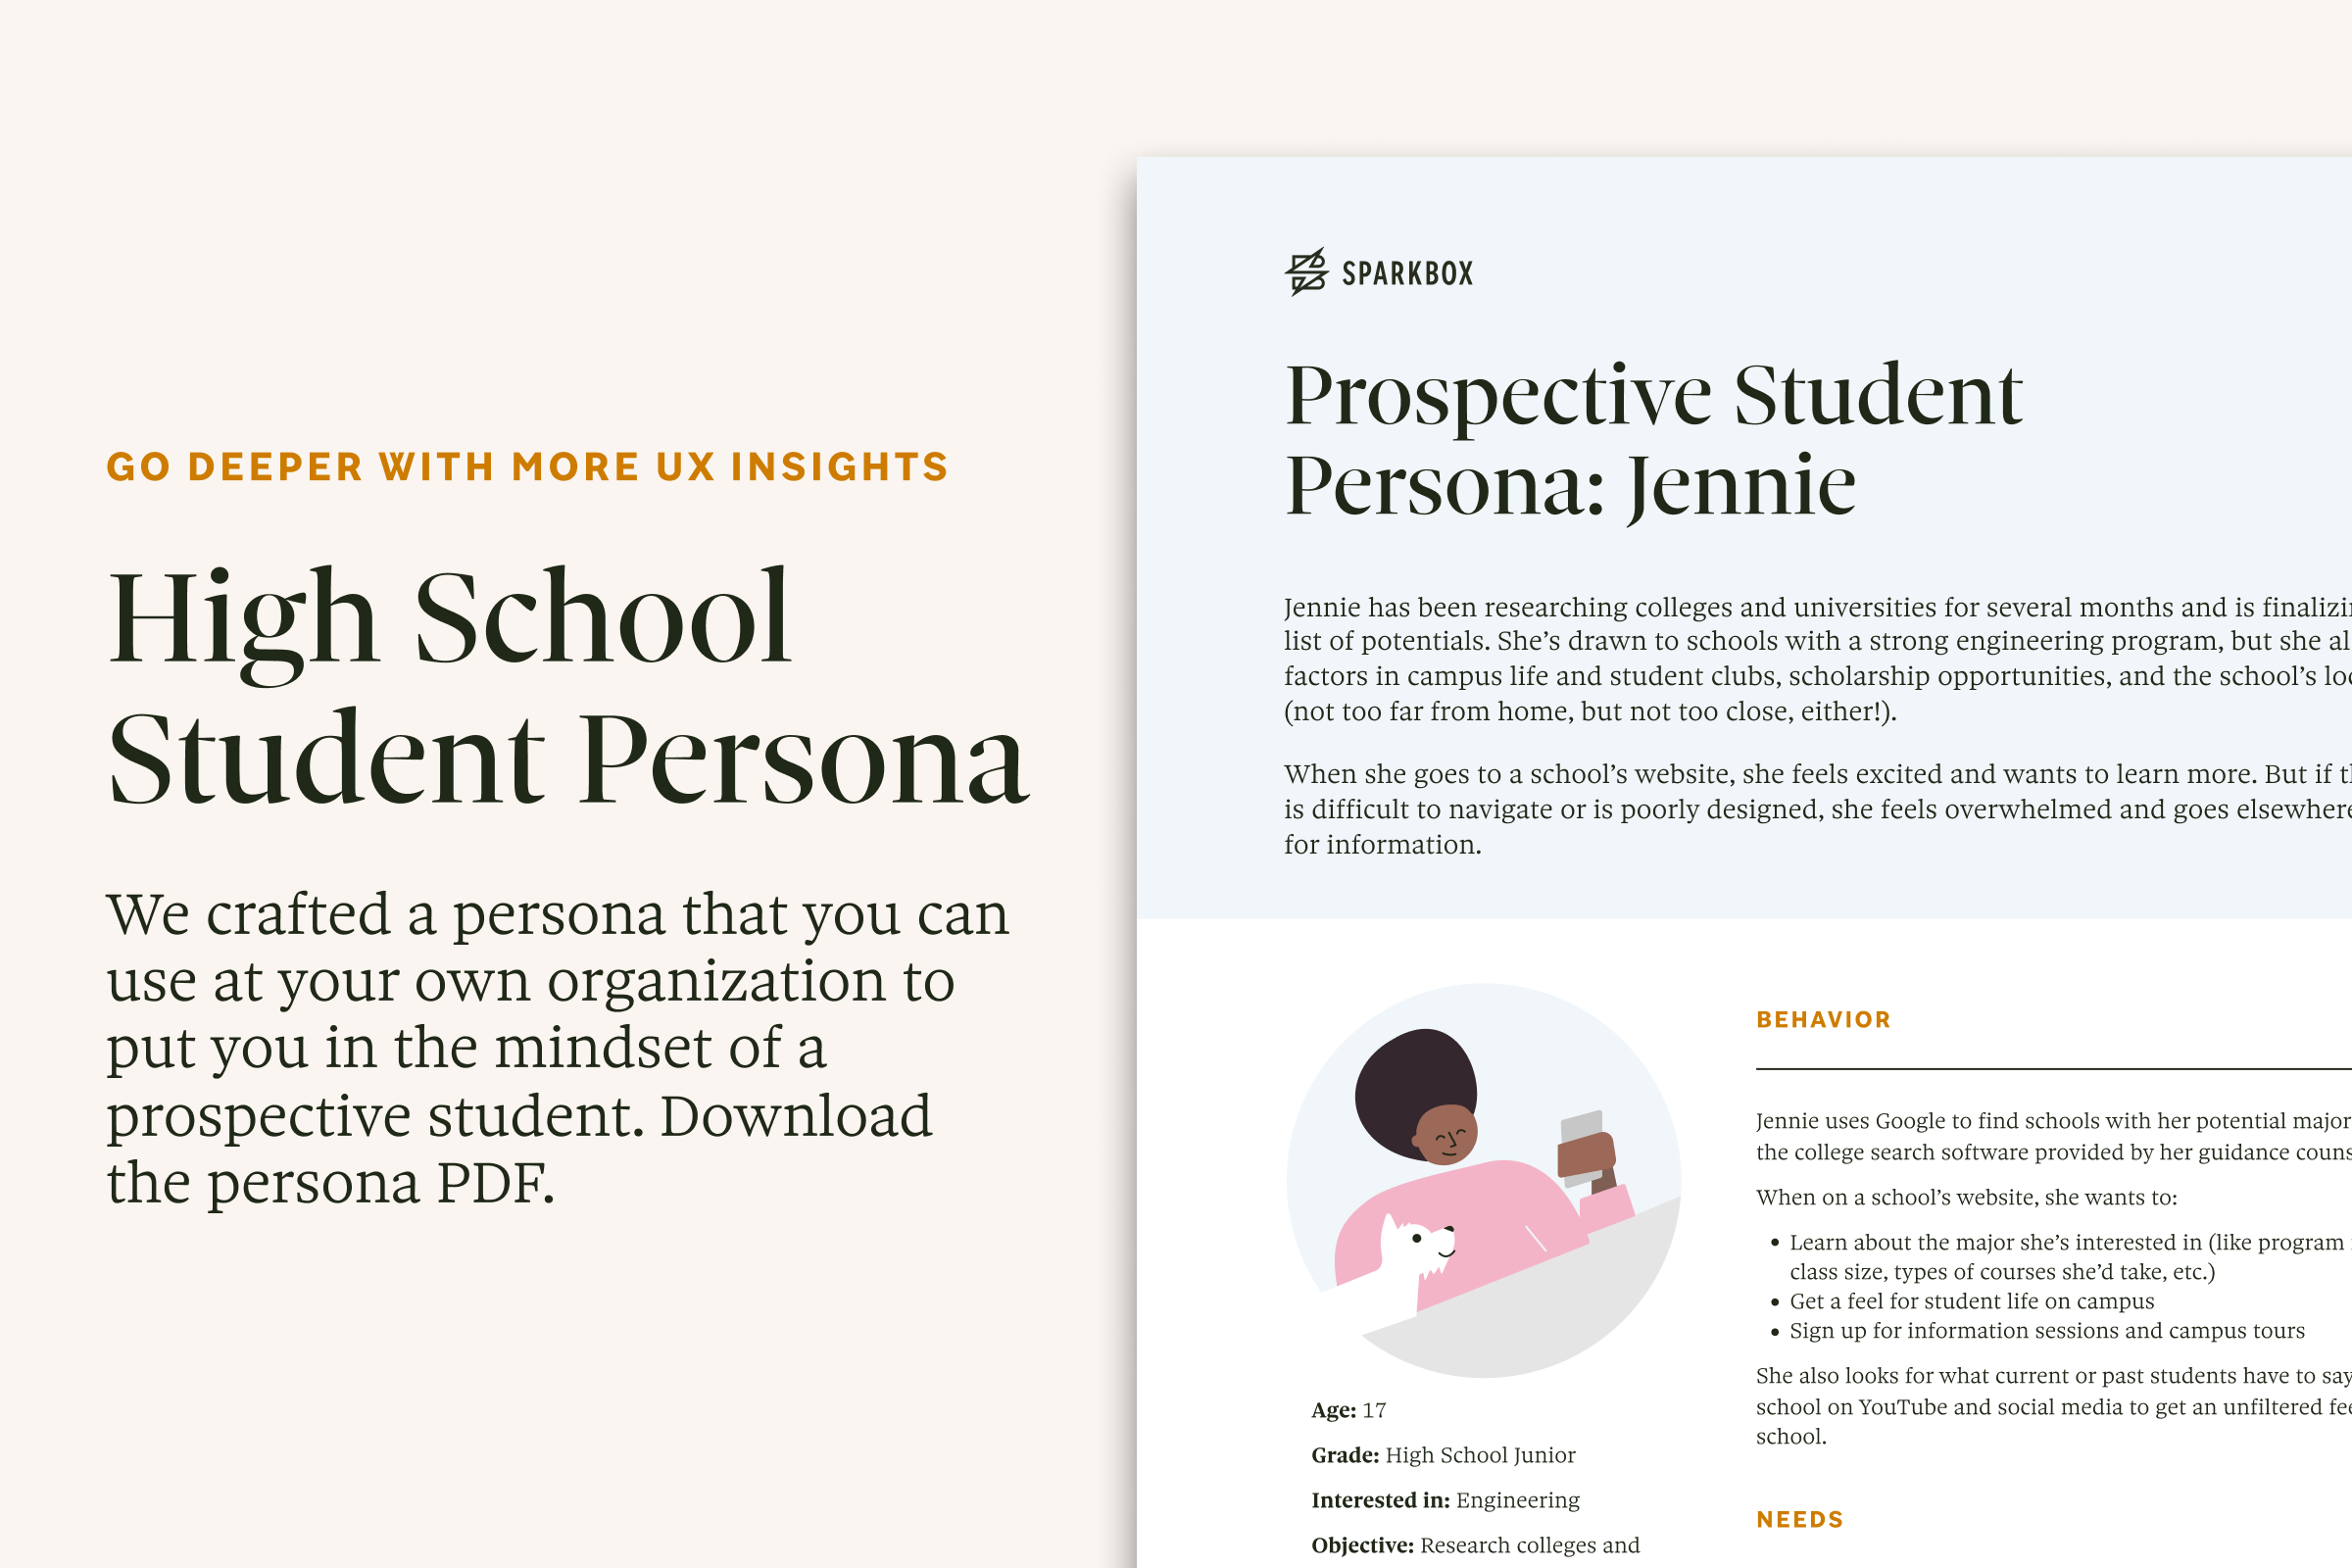 We crafted a persona that you can use at your own organization to put you in the mindset of a prospective student. Download the persona PDF